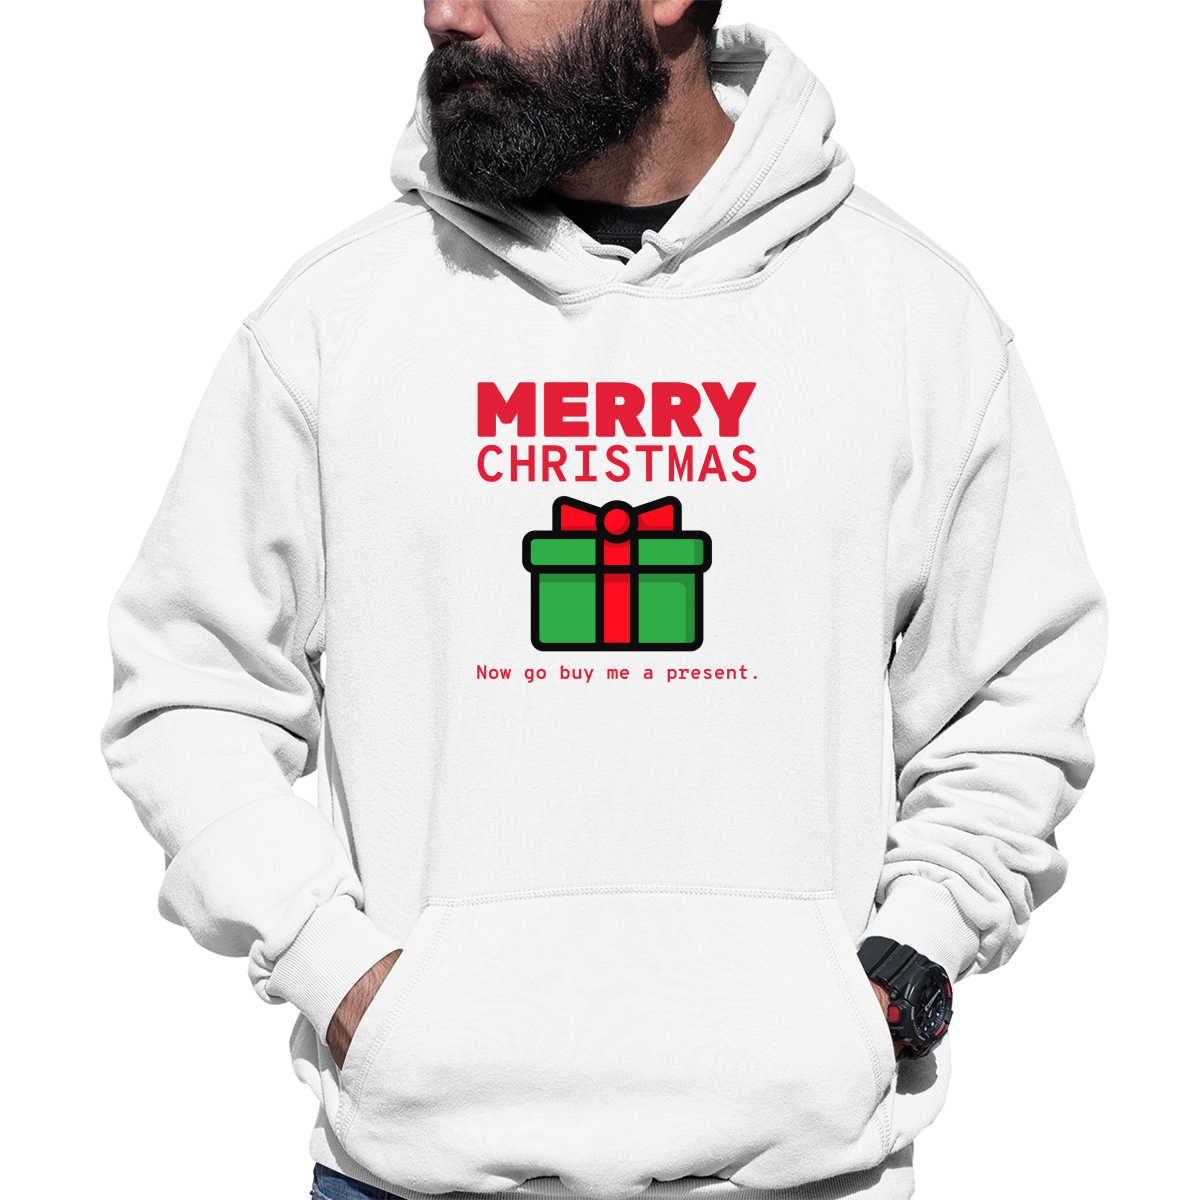 Merry Christmas Now Go Buy Me a Present Unisex Hoodie | White